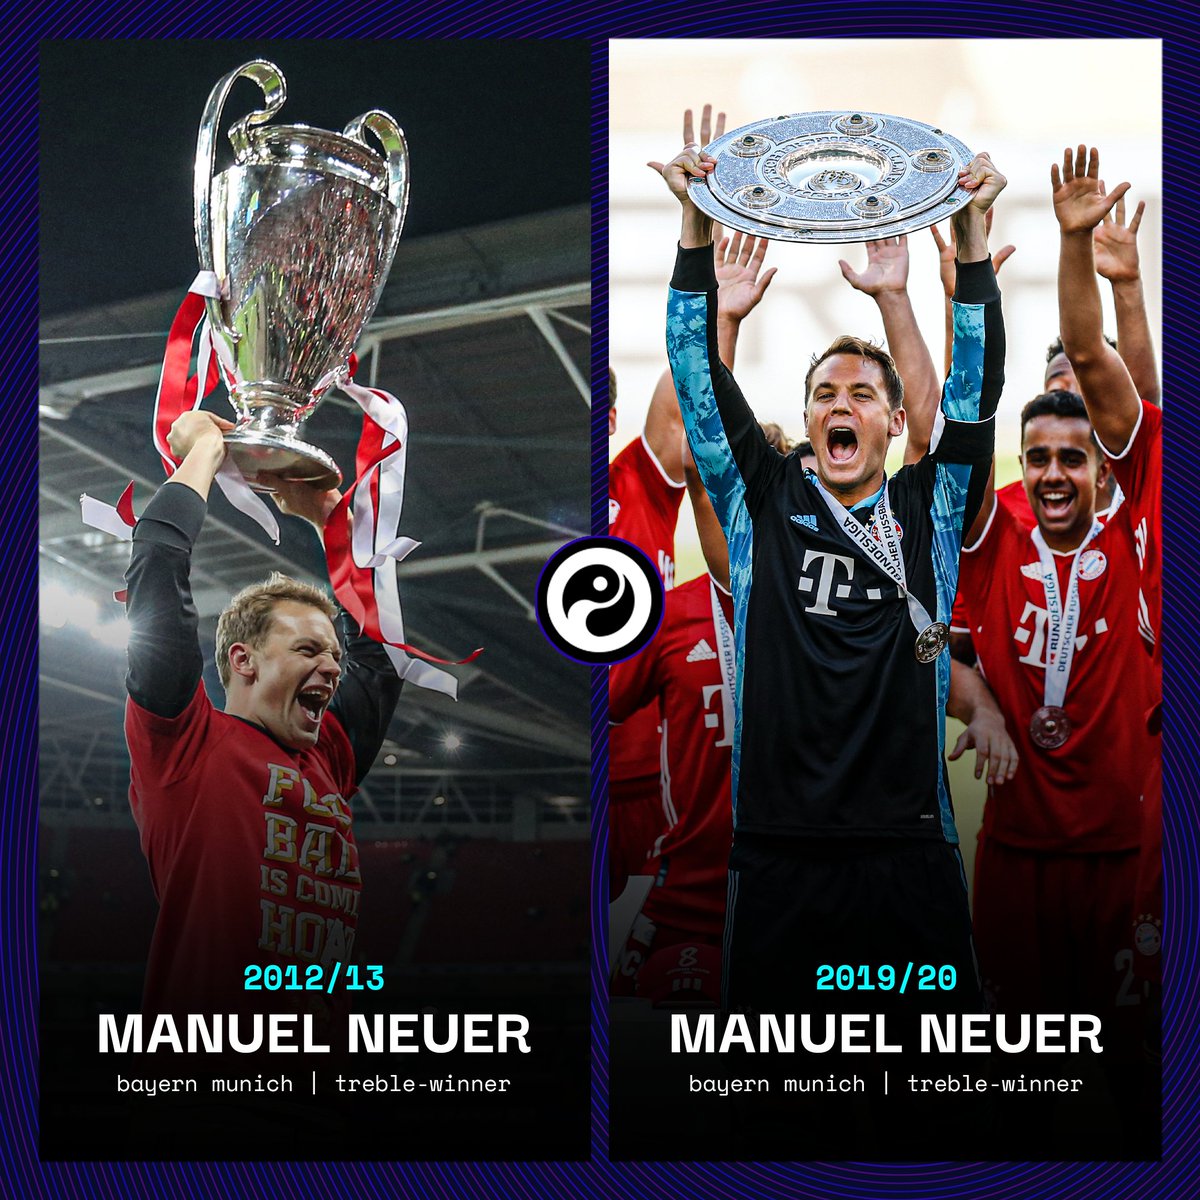 2012/13: Manuel Neuer wins the treble with Bayern Munich2019/20: Manuel Neuer wins the treble with Bayern MunichDifferent year, same result. 